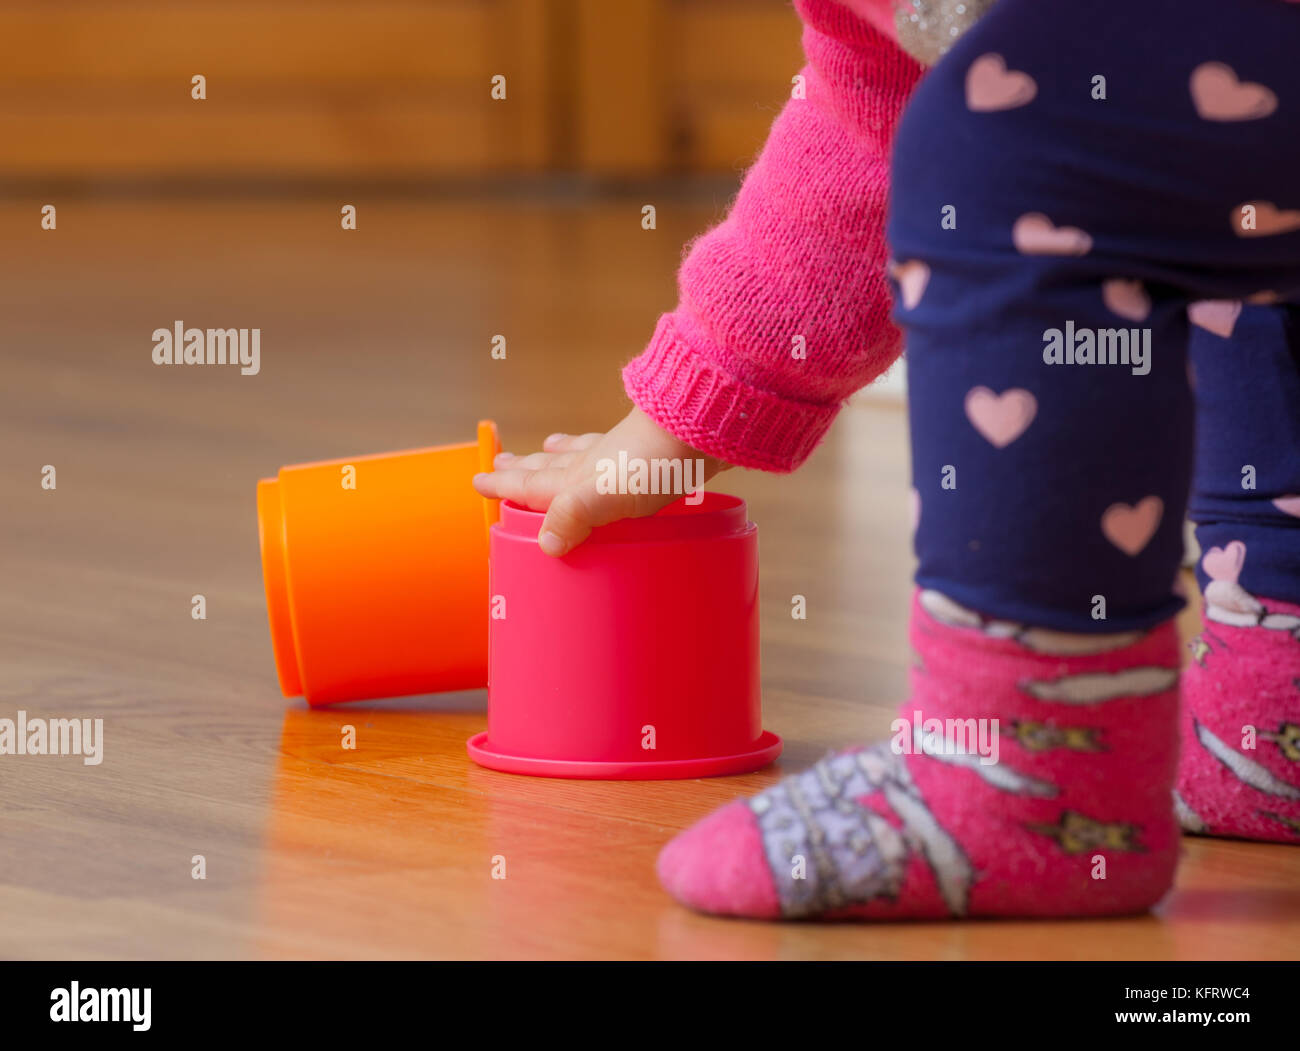 Toddler baby girl plays with colored cups, toy for cognitive development. Stock Photo